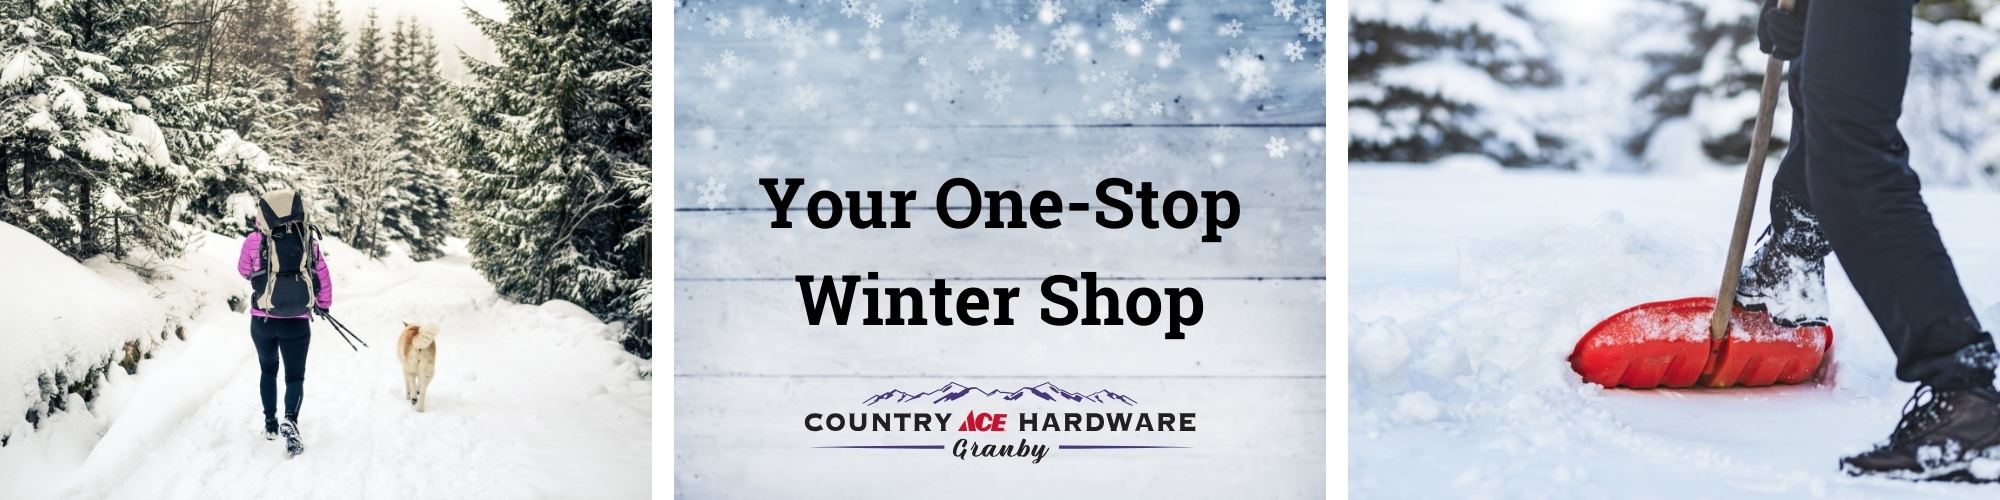 woman walking dog in snow, man shoveling, text saying one stop shop for winter prep country ace hardware